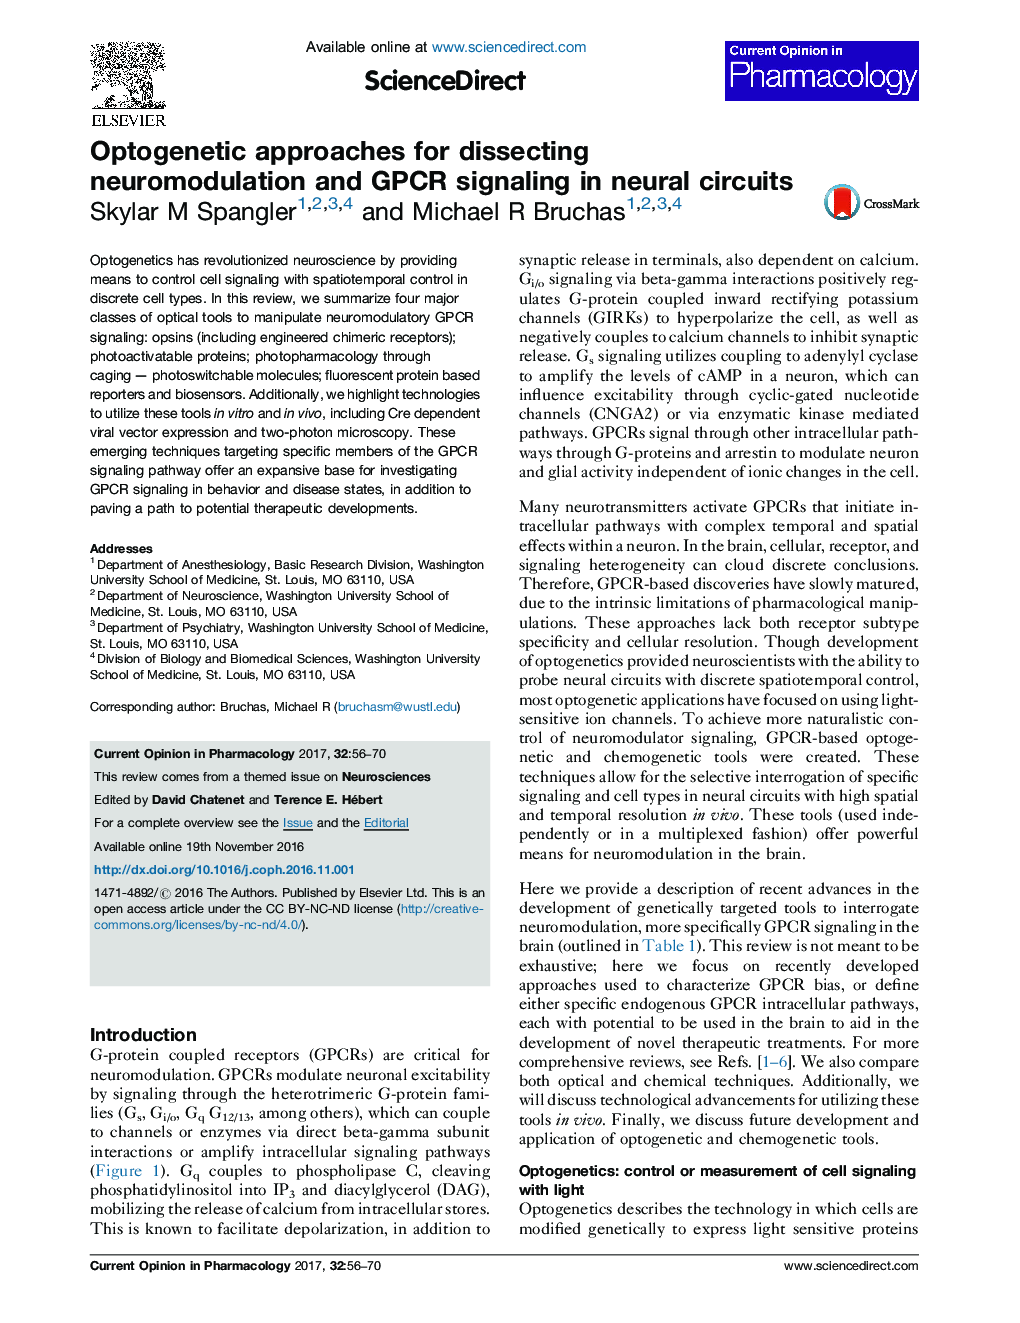 Optogenetic approaches for dissecting neuromodulation and GPCR signaling in neural circuits